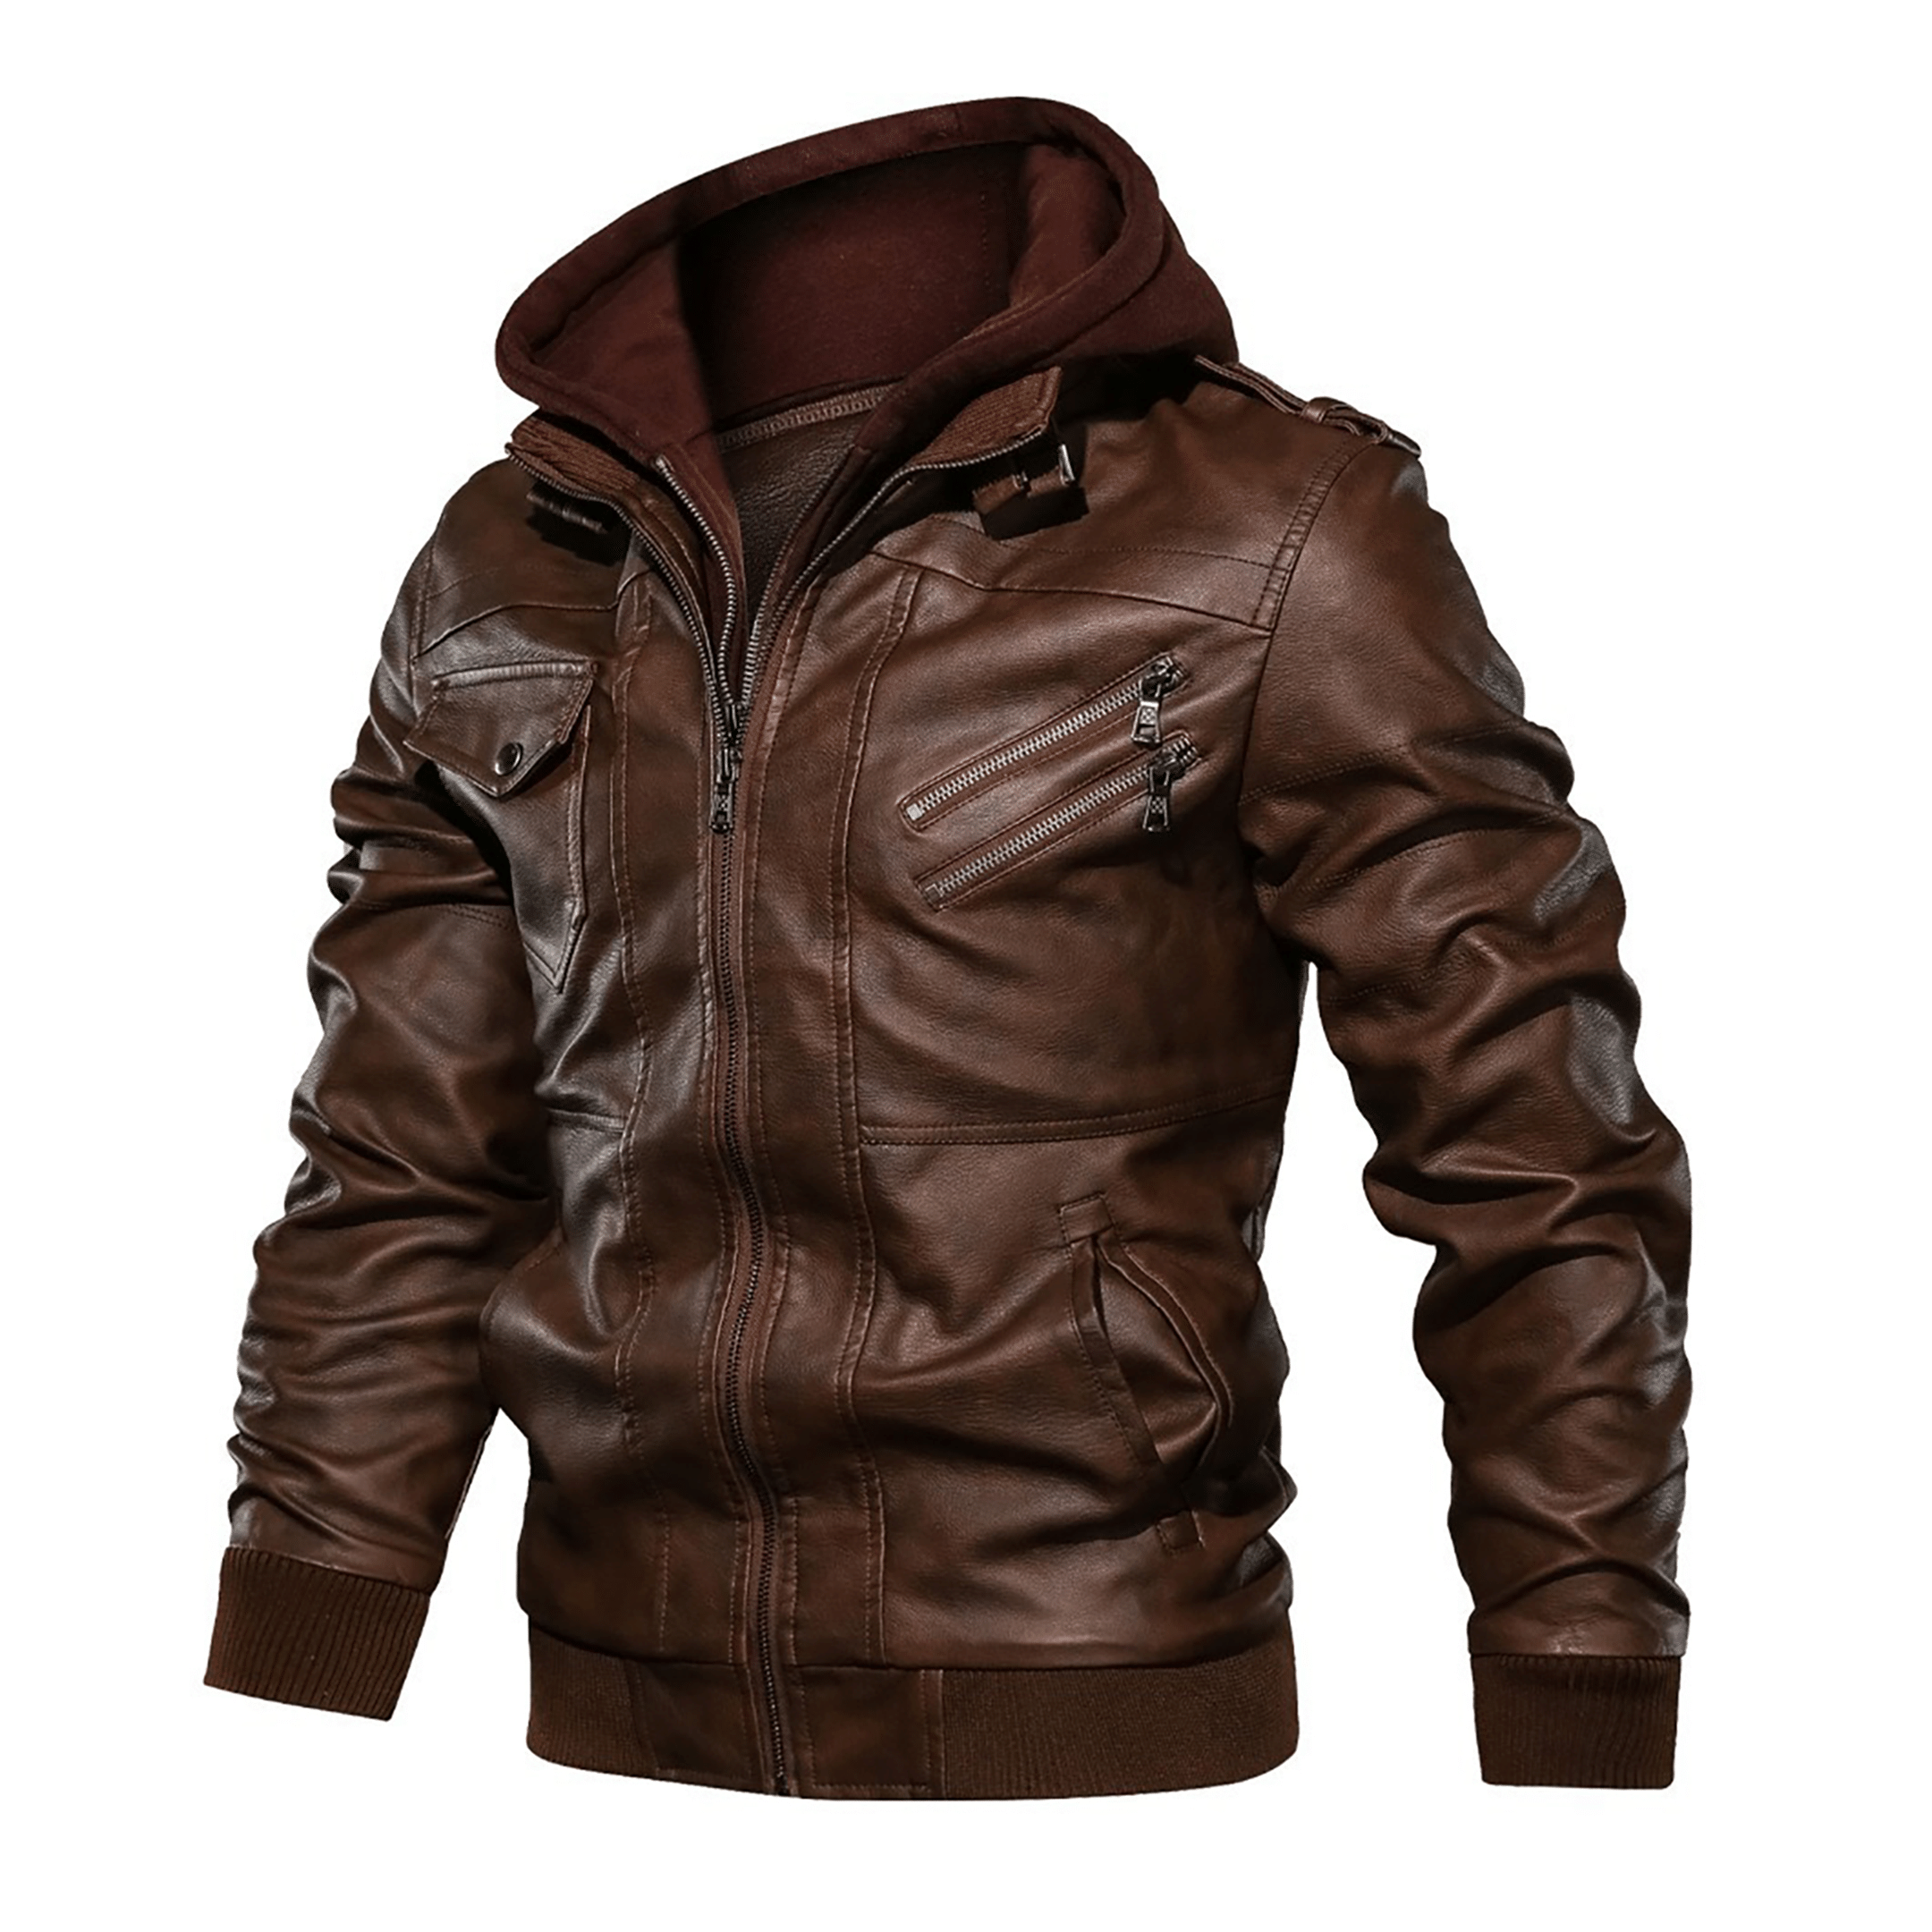 Top leather jackets and latest products 375